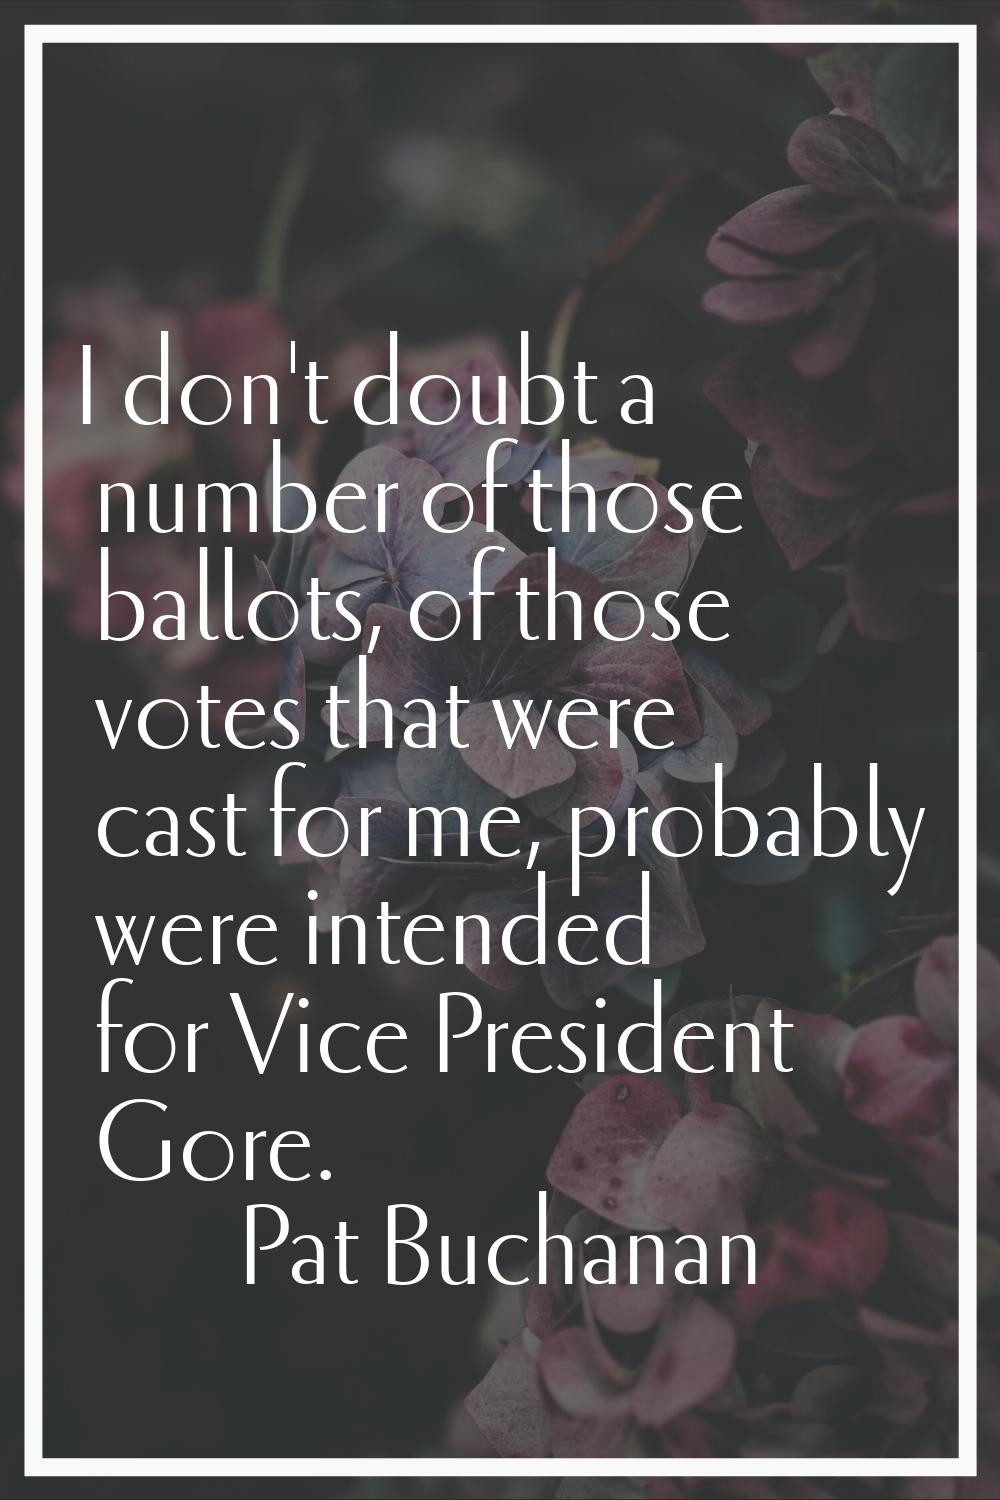 I don't doubt a number of those ballots, of those votes that were cast for me, probably were intend